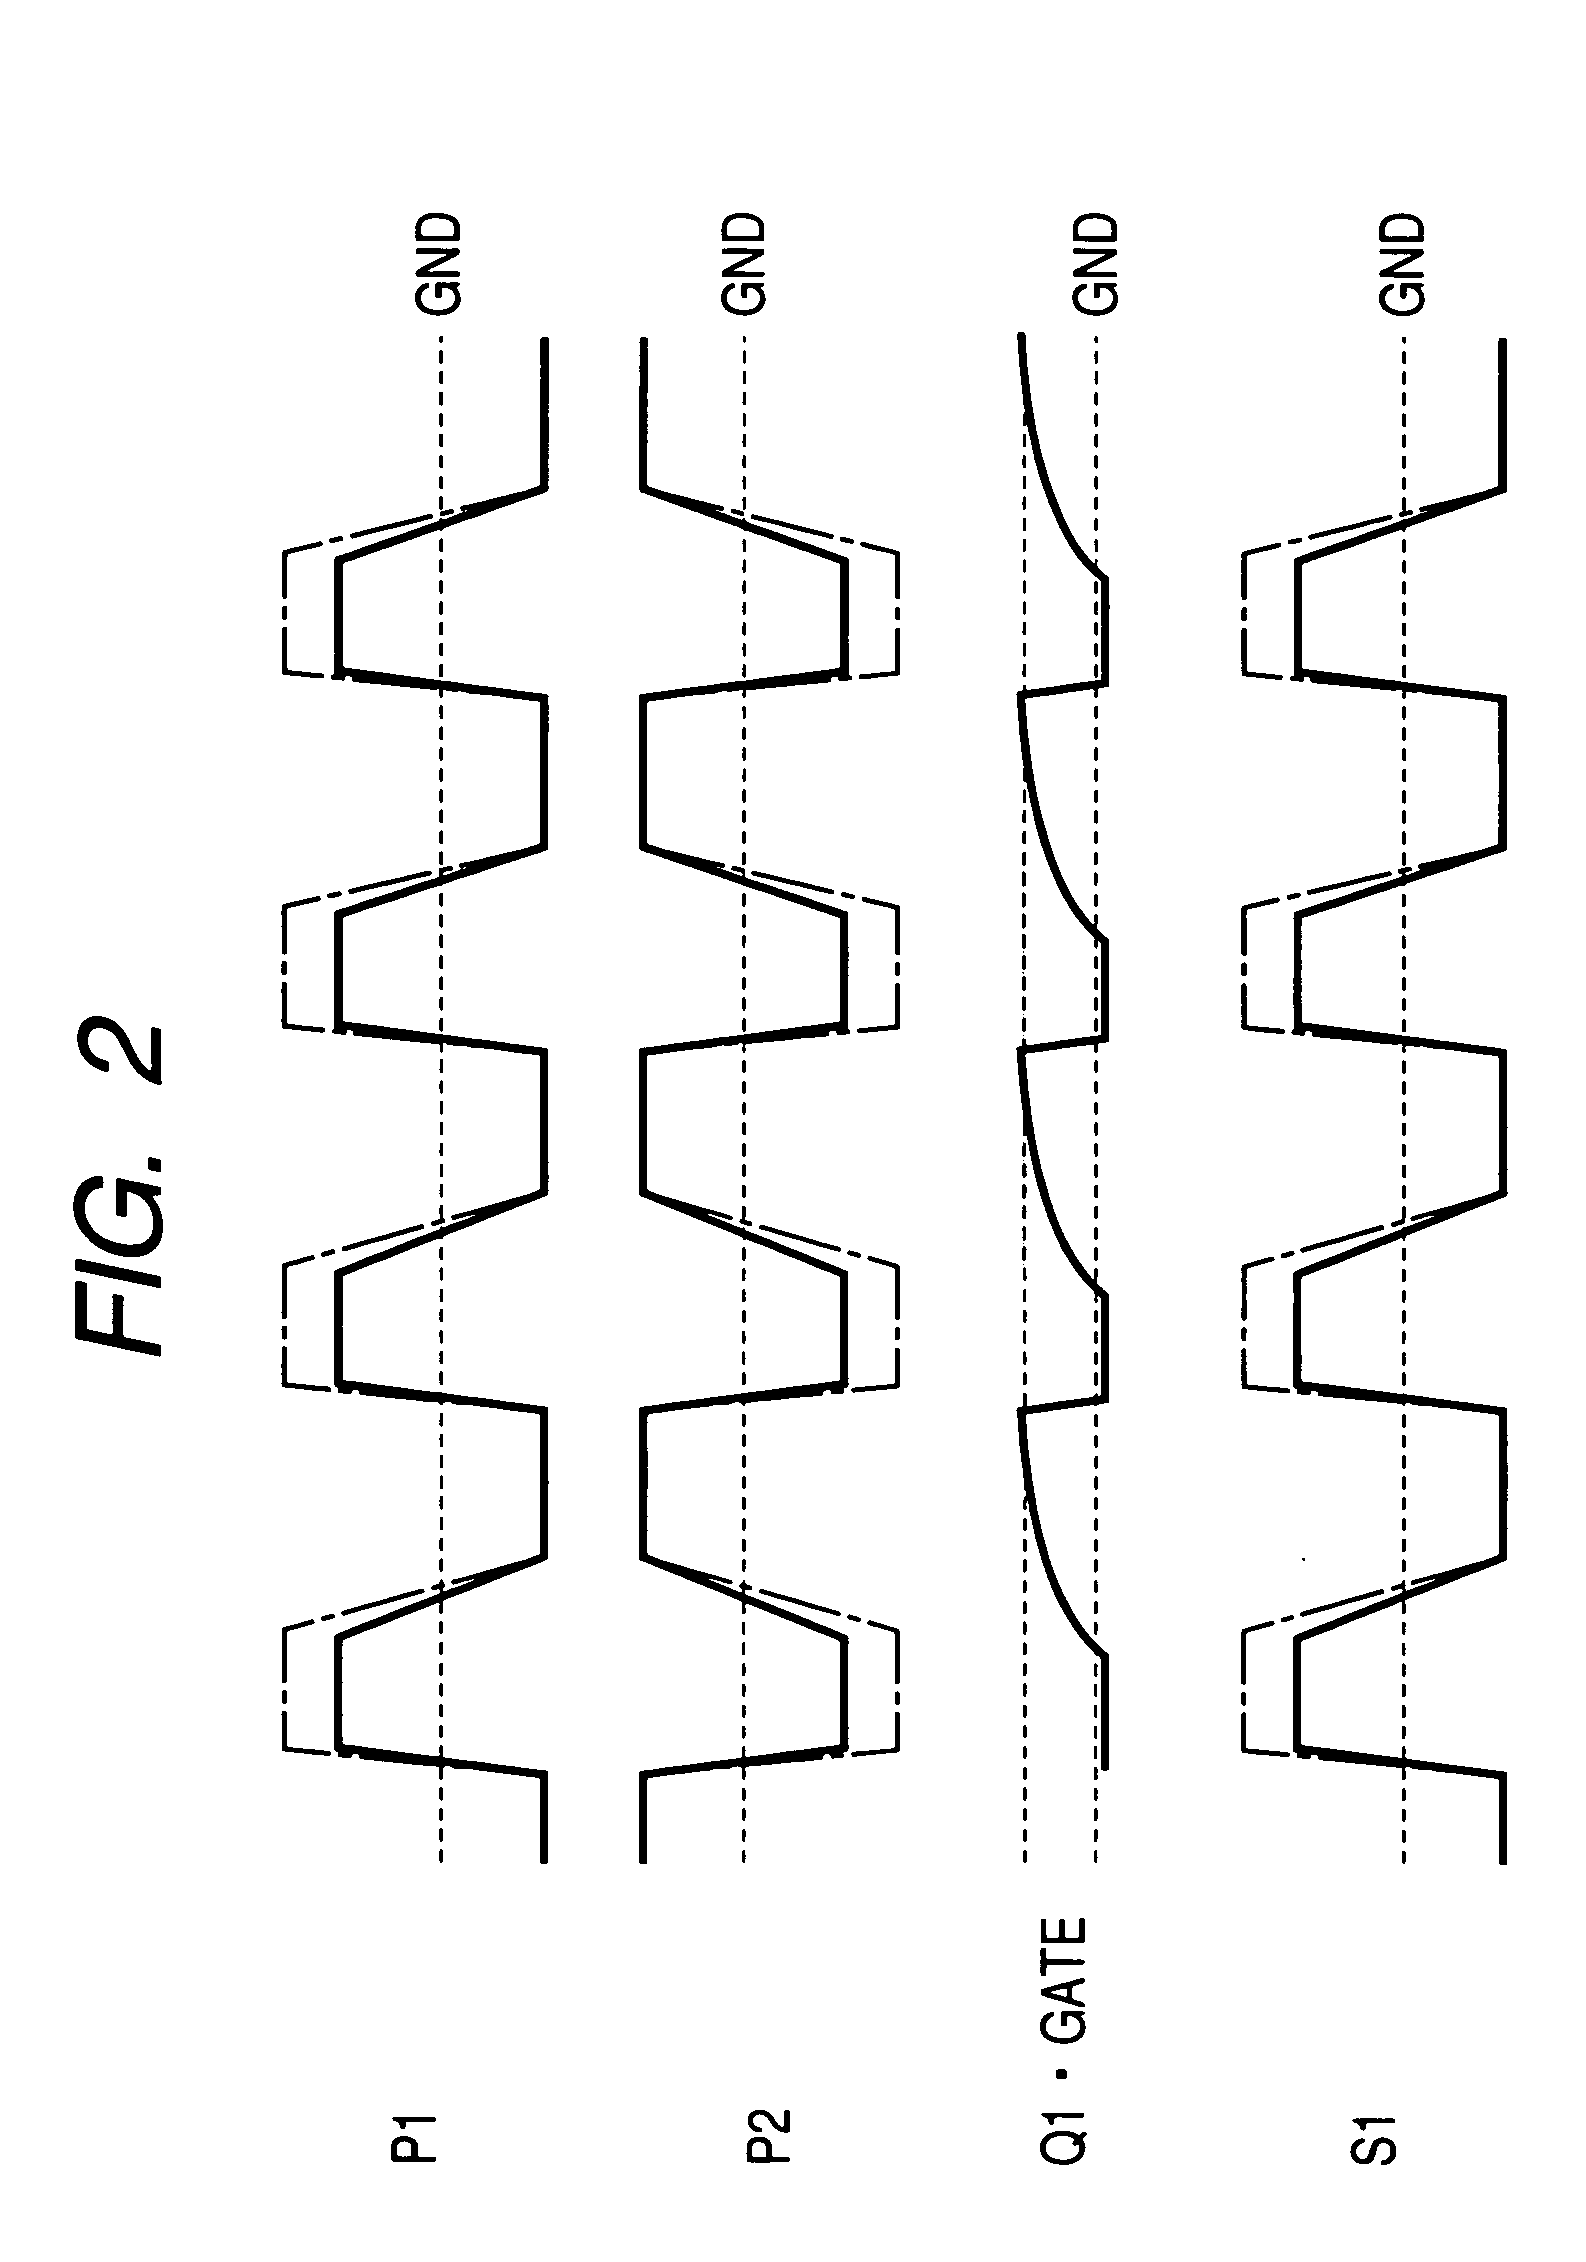 Constant-voltage switching power supply provided with overvoltage output protecting circuit, and electronic apparatus provided with overvoltage protecting circuit